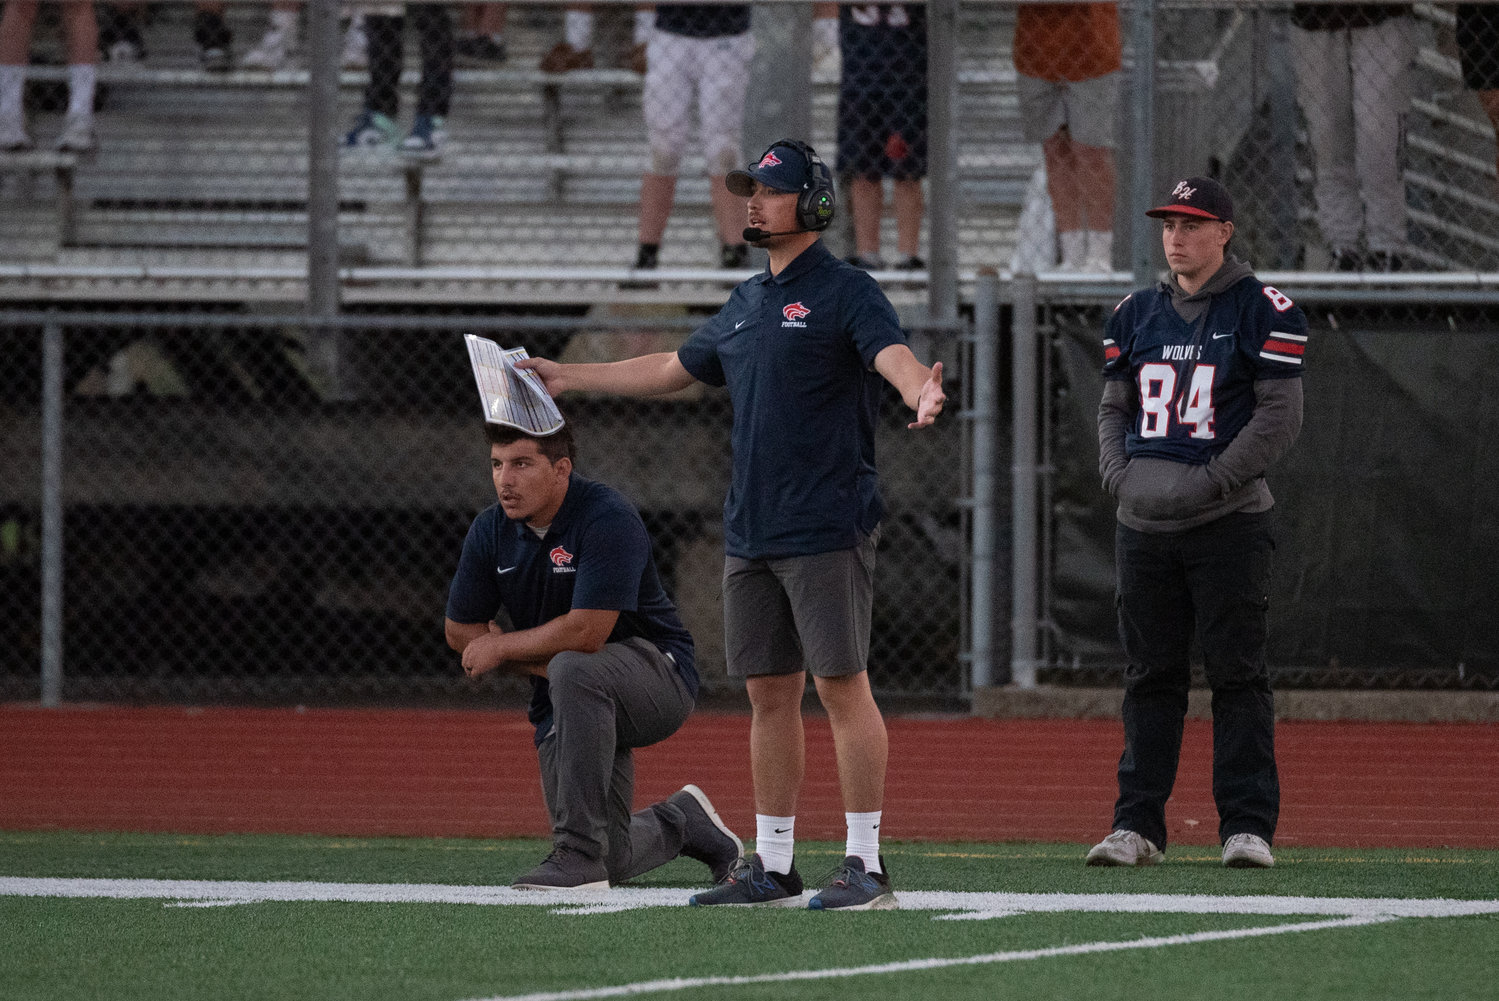 Black Hills coach Garrett Baldwin asks for an explanation during the Wolves' game at North Thurston on Sept. 8 in Lacey.